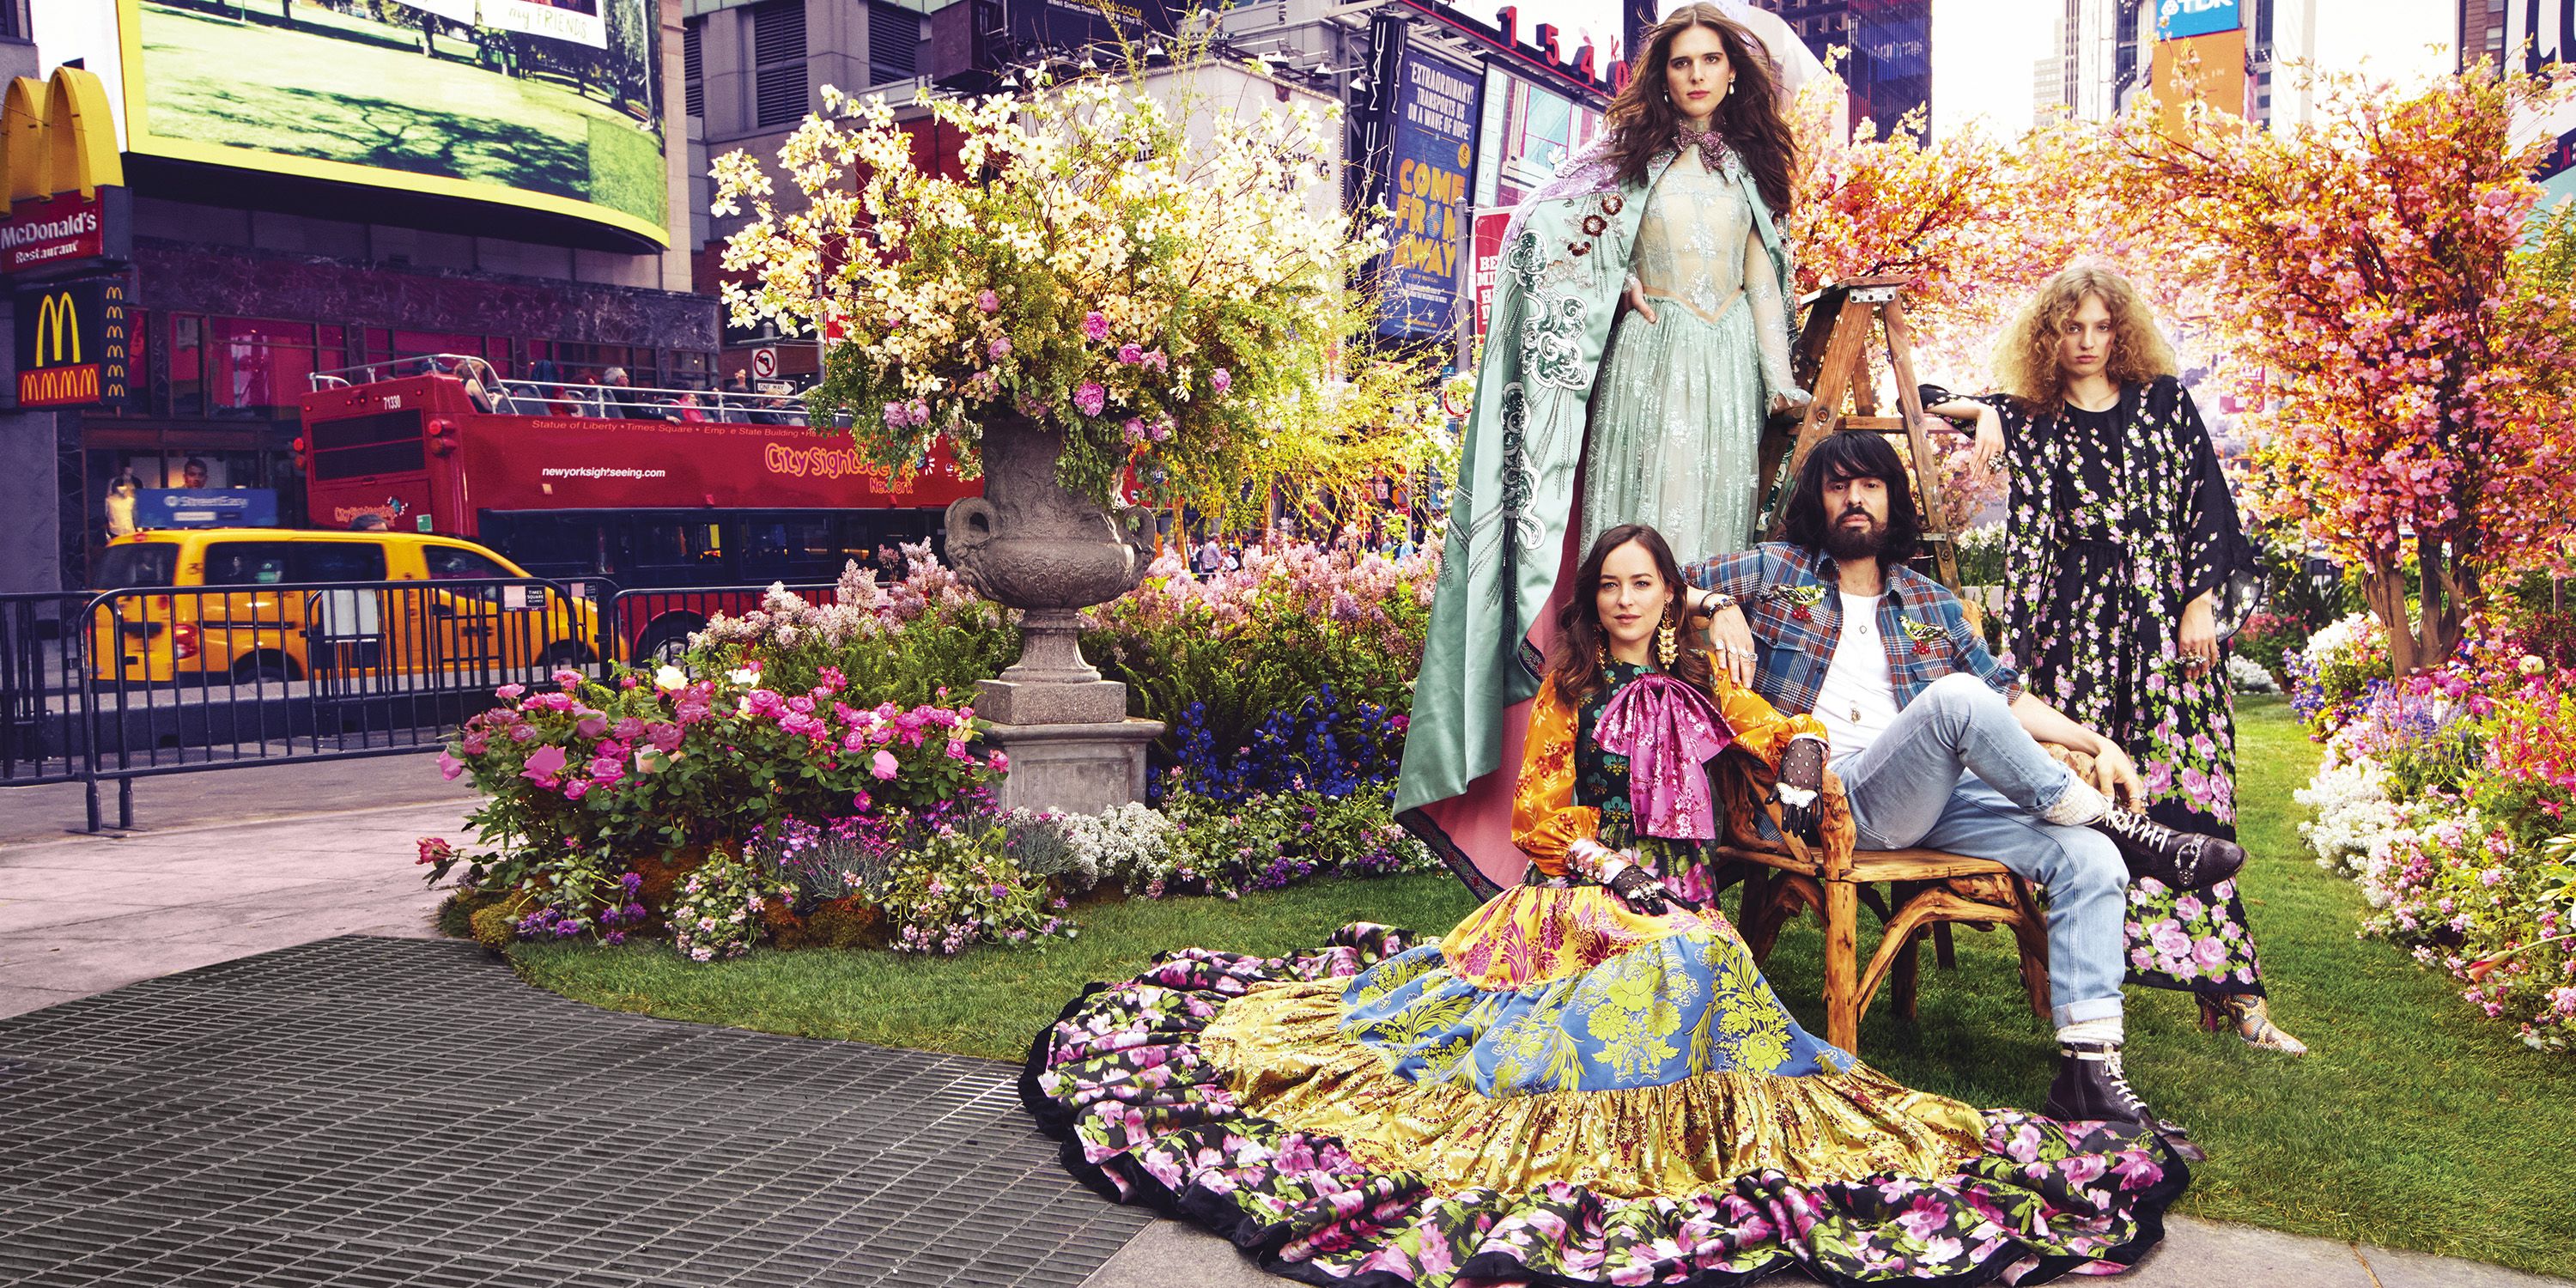 Gucci, Alessandro Michele Debut Bloom Fragrance